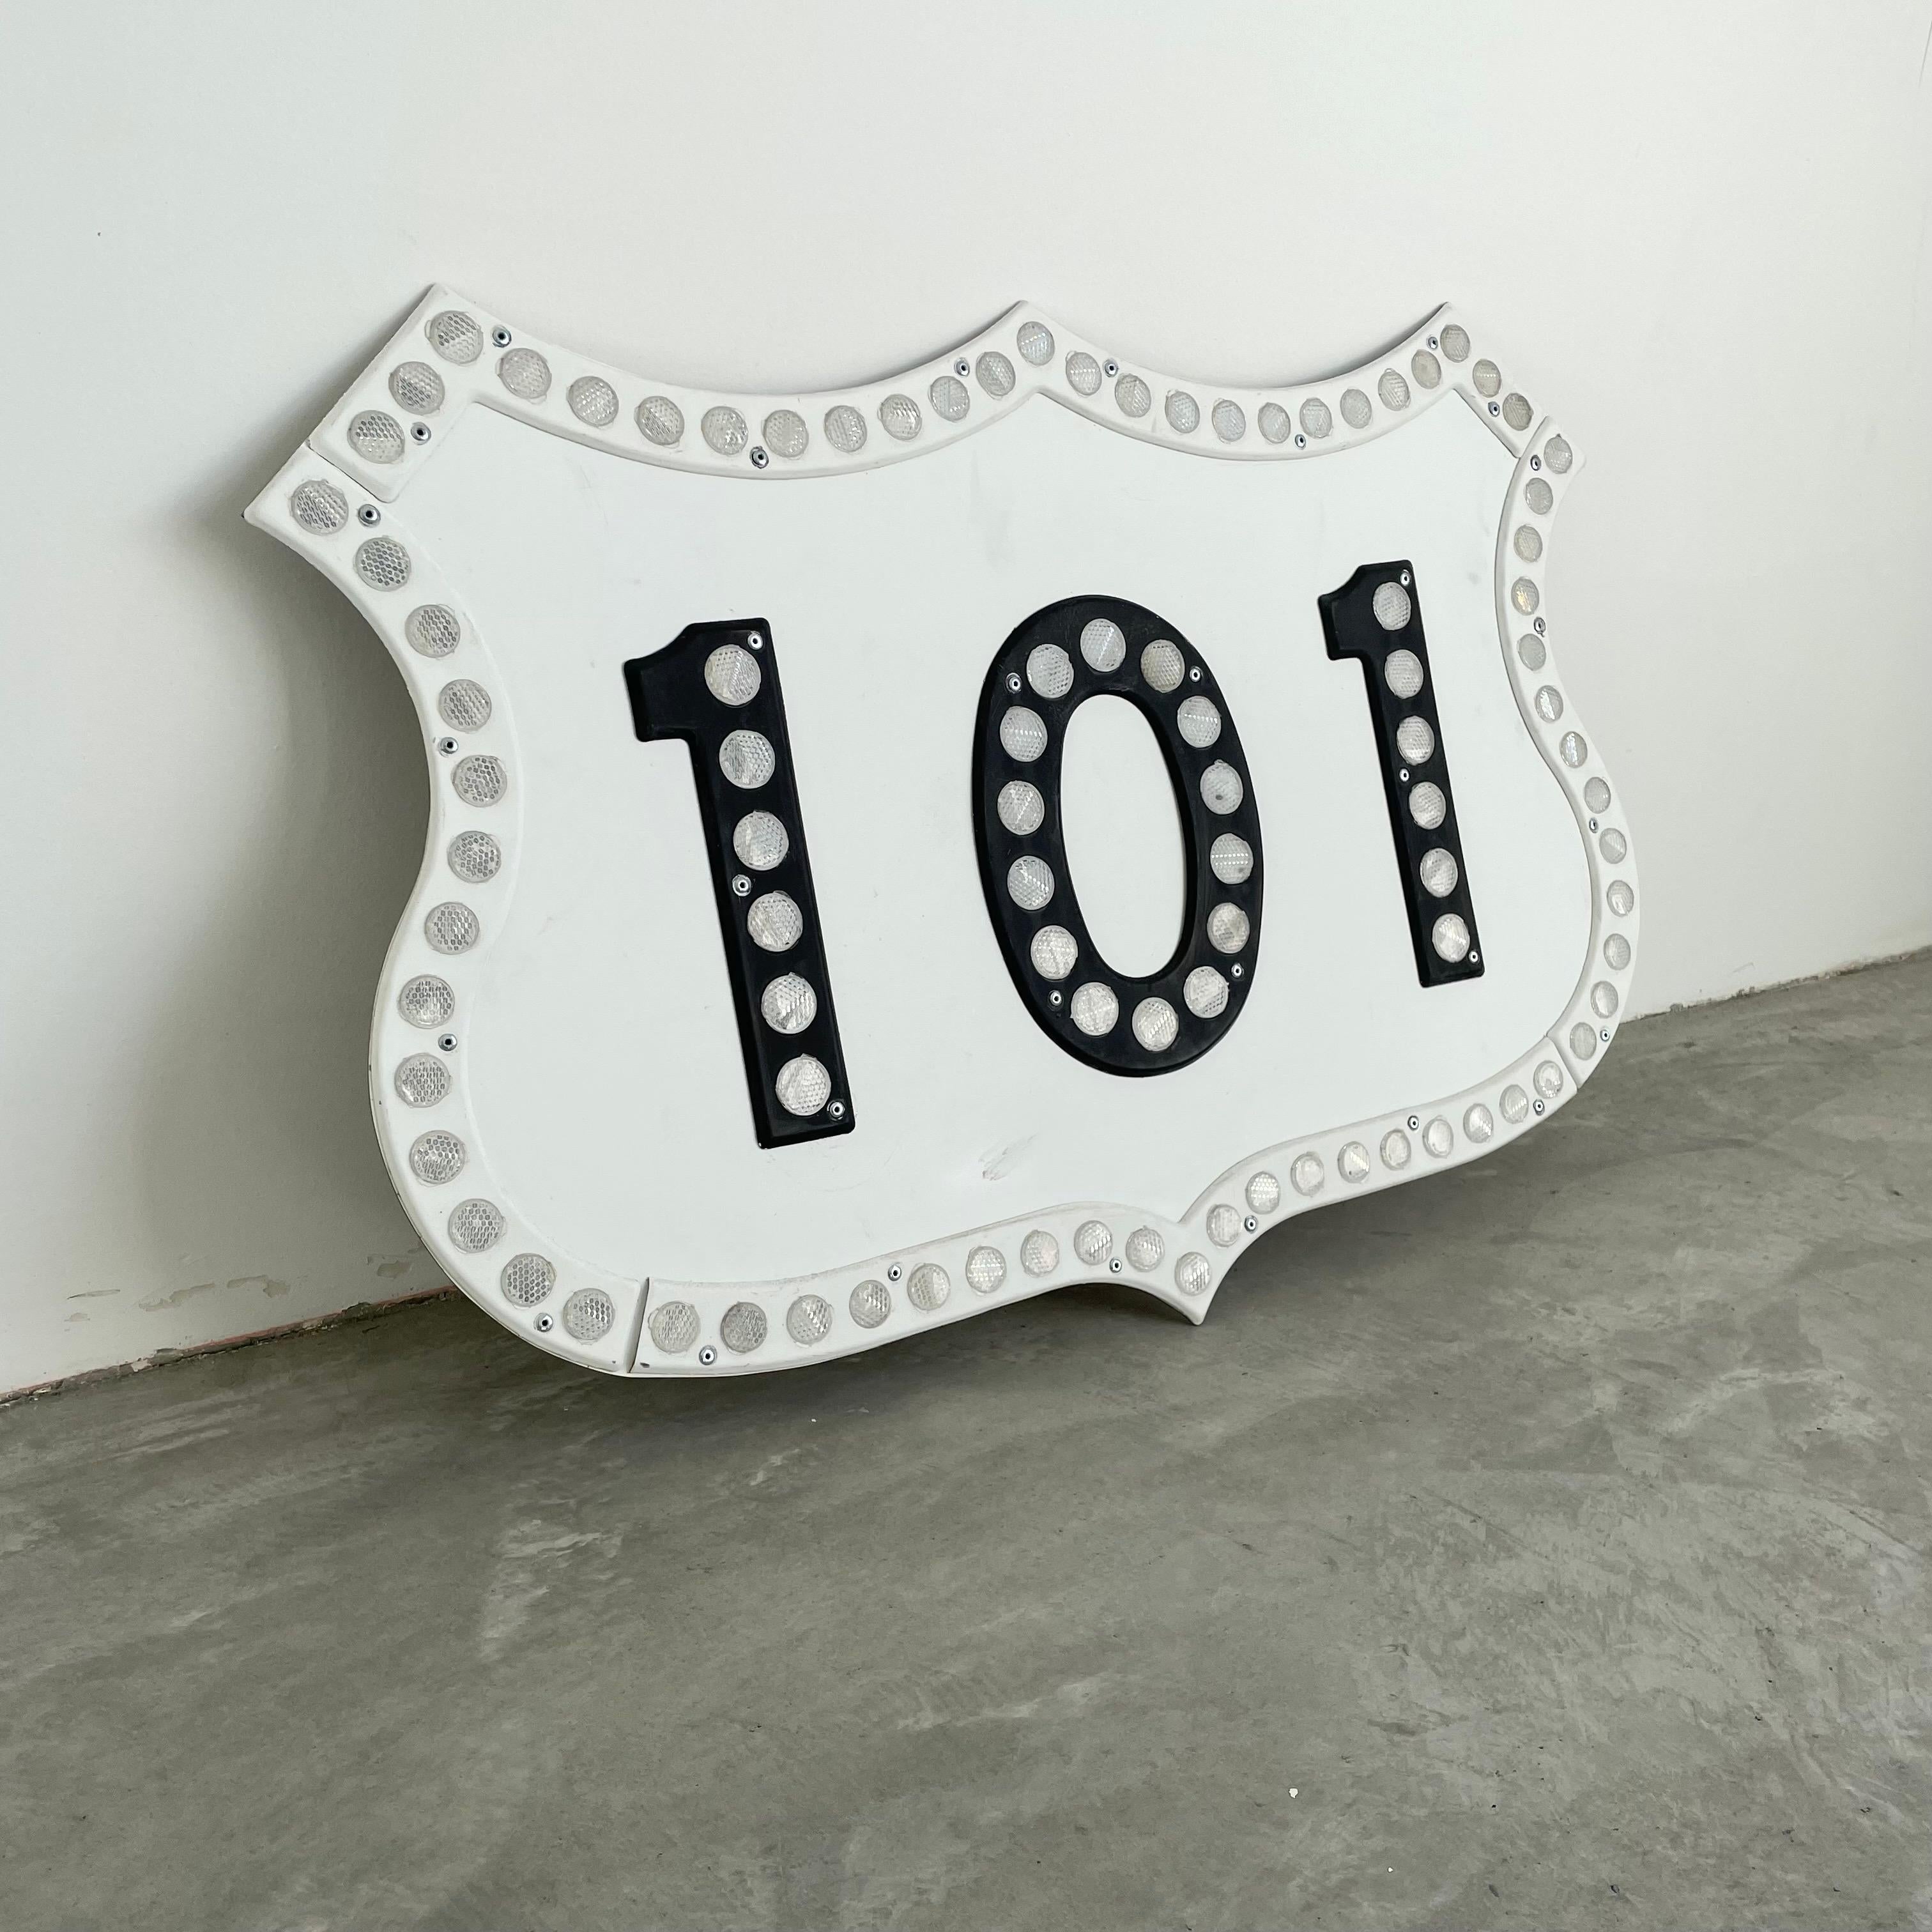 Super collectible sign from Los Angeles, California. 101 Freeway sign with all cats eyes reflectors intact. Originally on a massive green metal freeway sign. Excellent vintage condition. Extremely rare piece of Los Angeles, transportation ephemera.